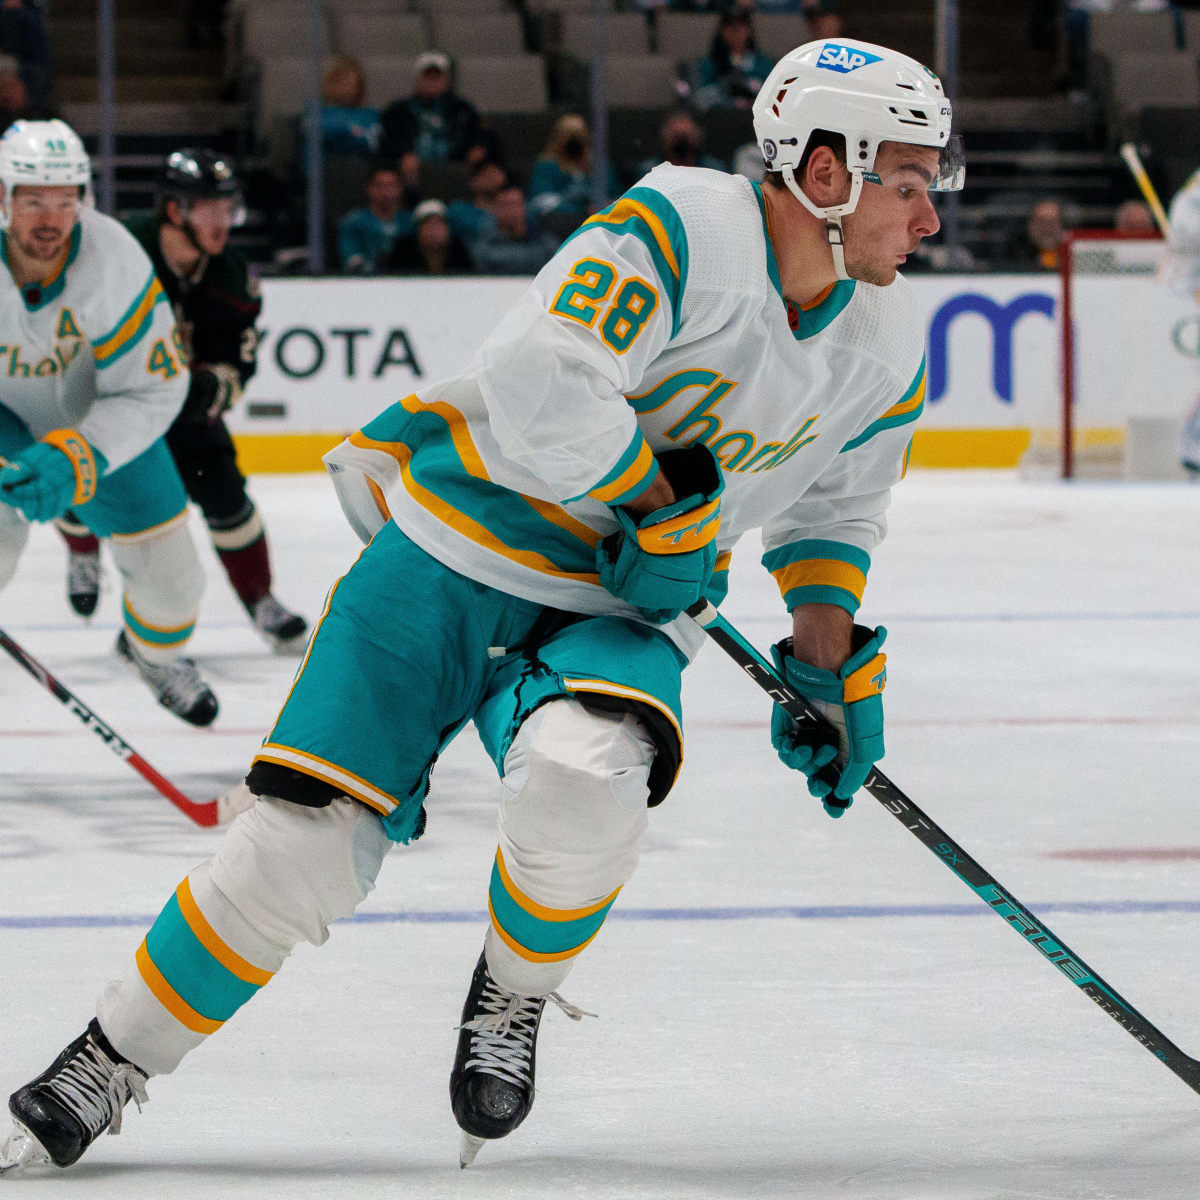 Timo Meier traded by San Jose Sharks to New Jersey Devils